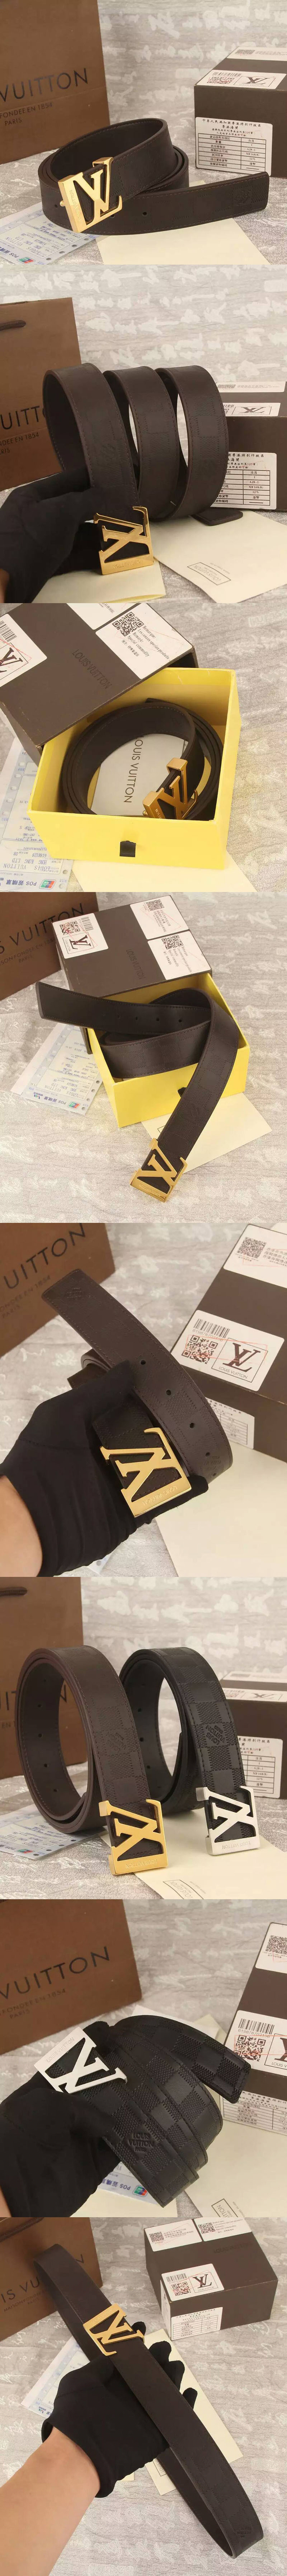 Replica Louis Vuitton Black/Coffee Belts With Gold/Silver Buckle